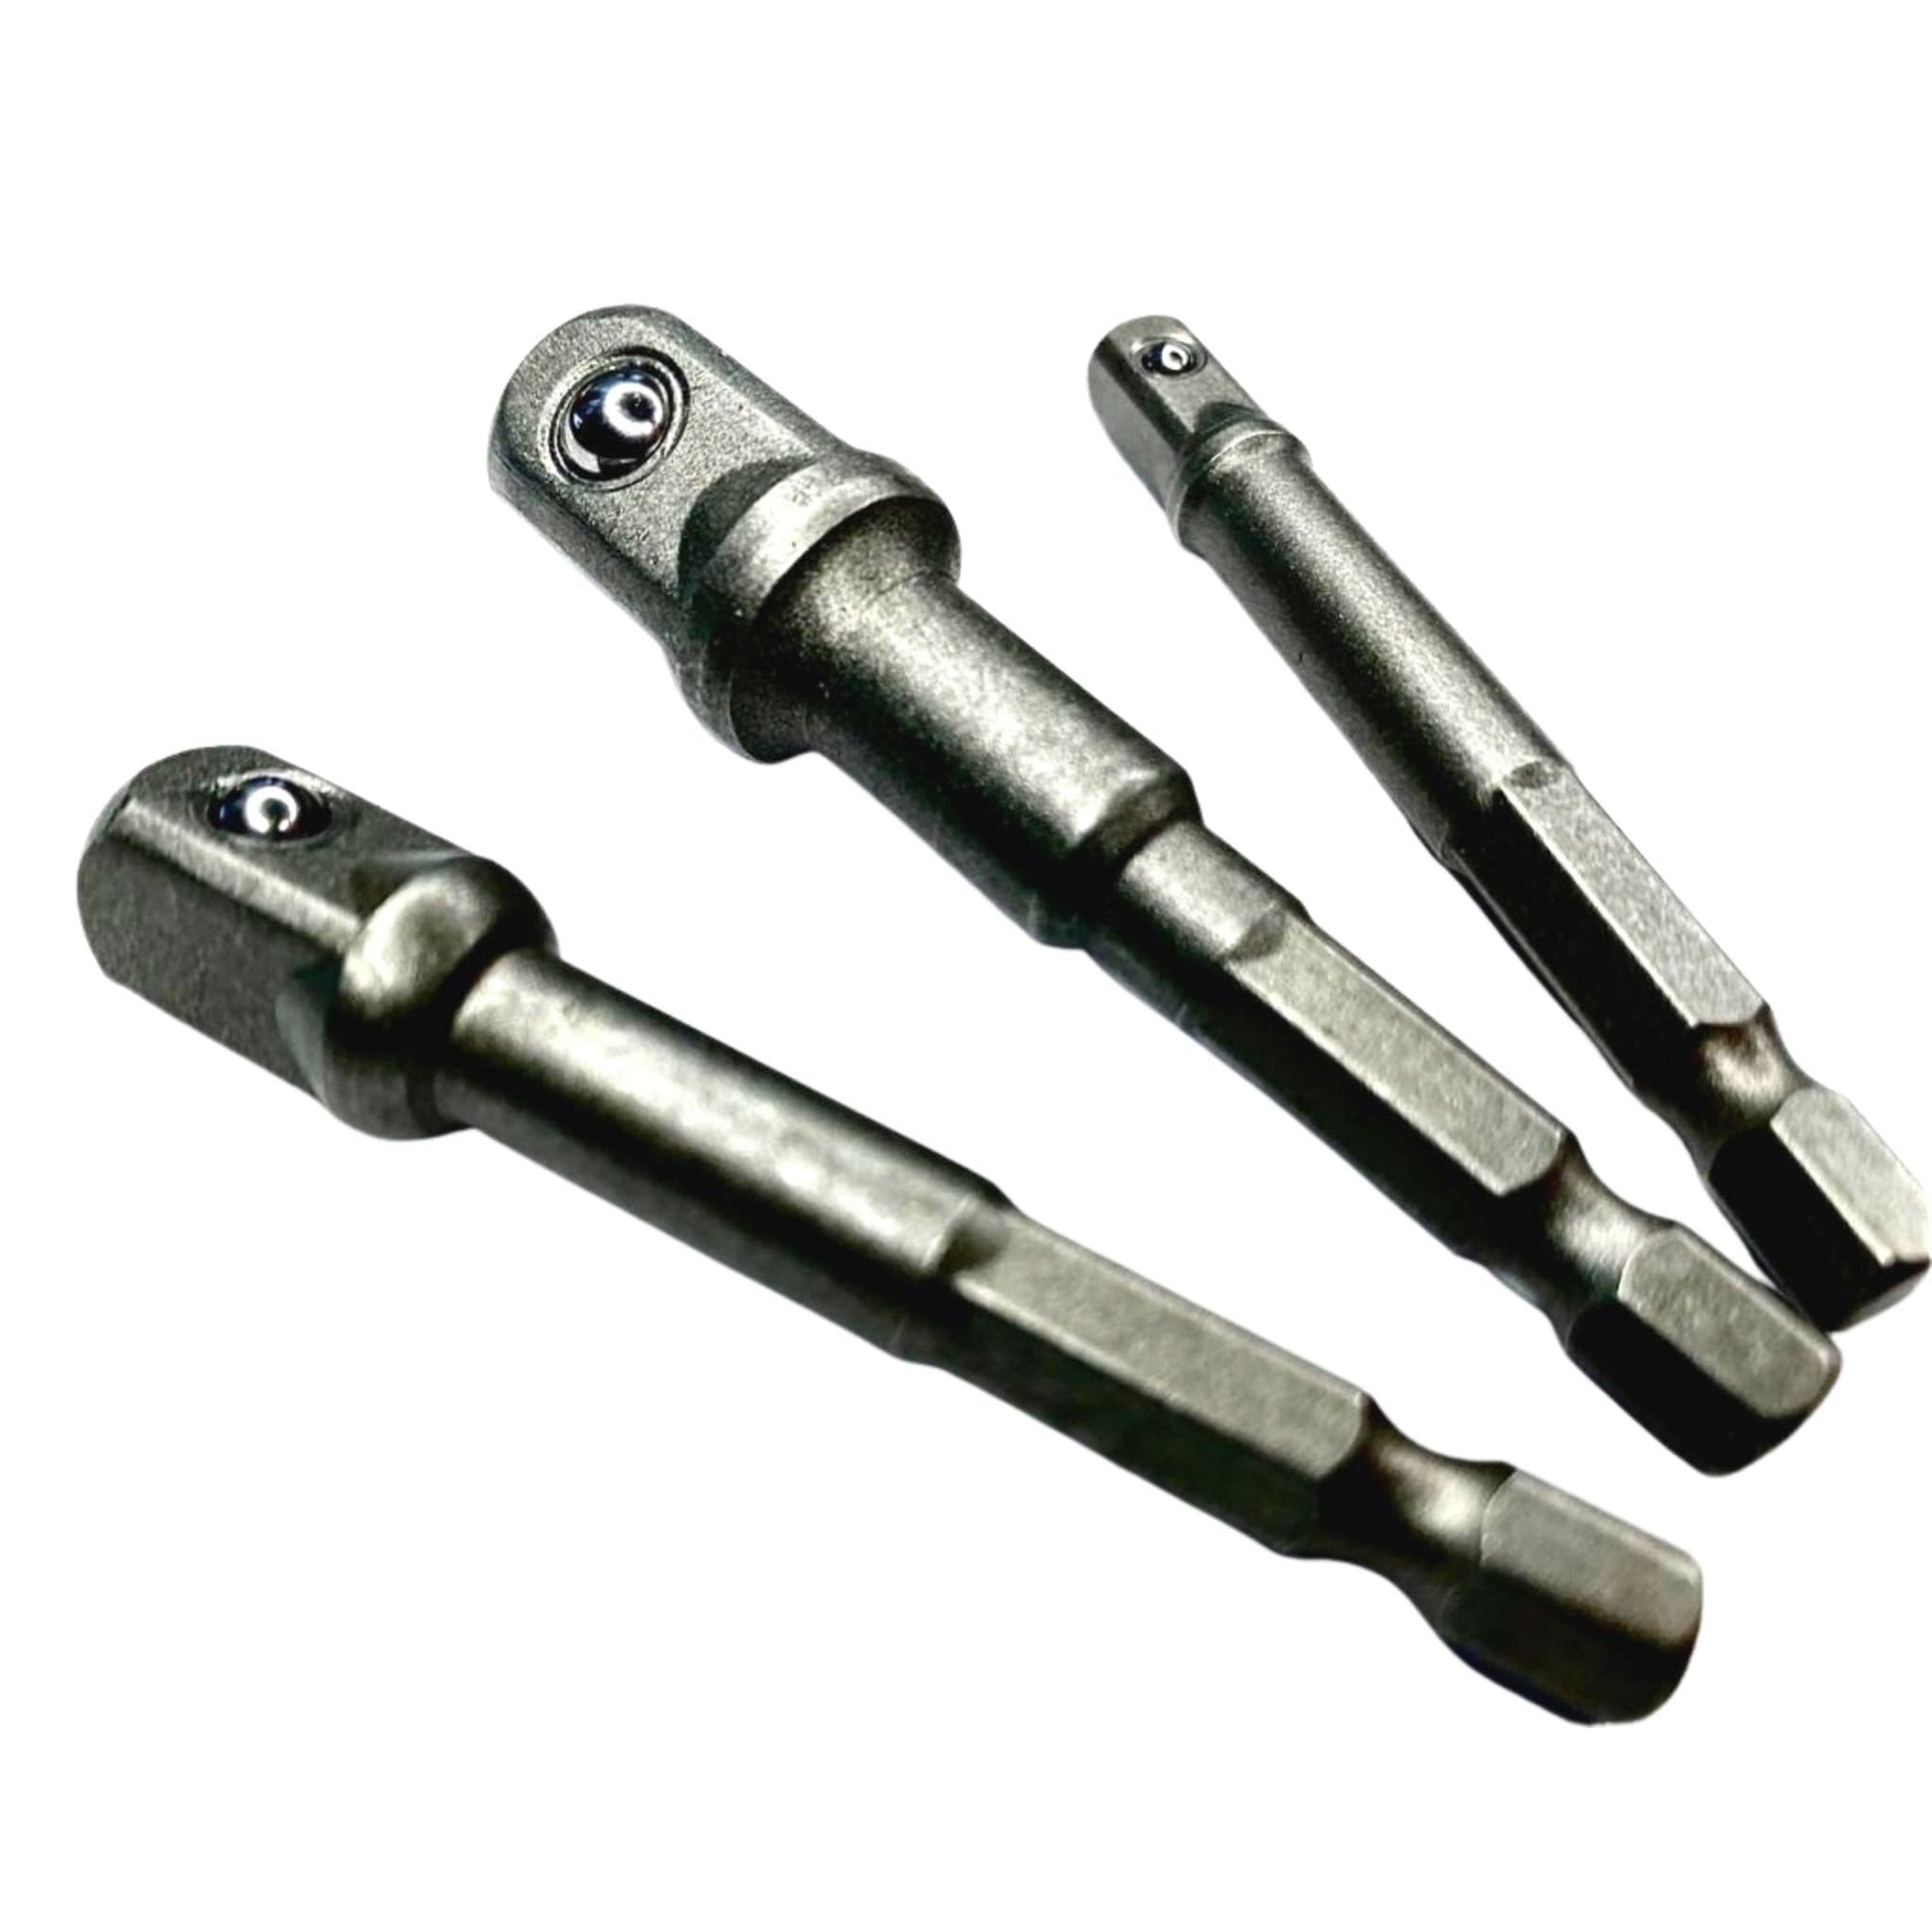 3 Piece Adapter Set - South East Clearance Centre